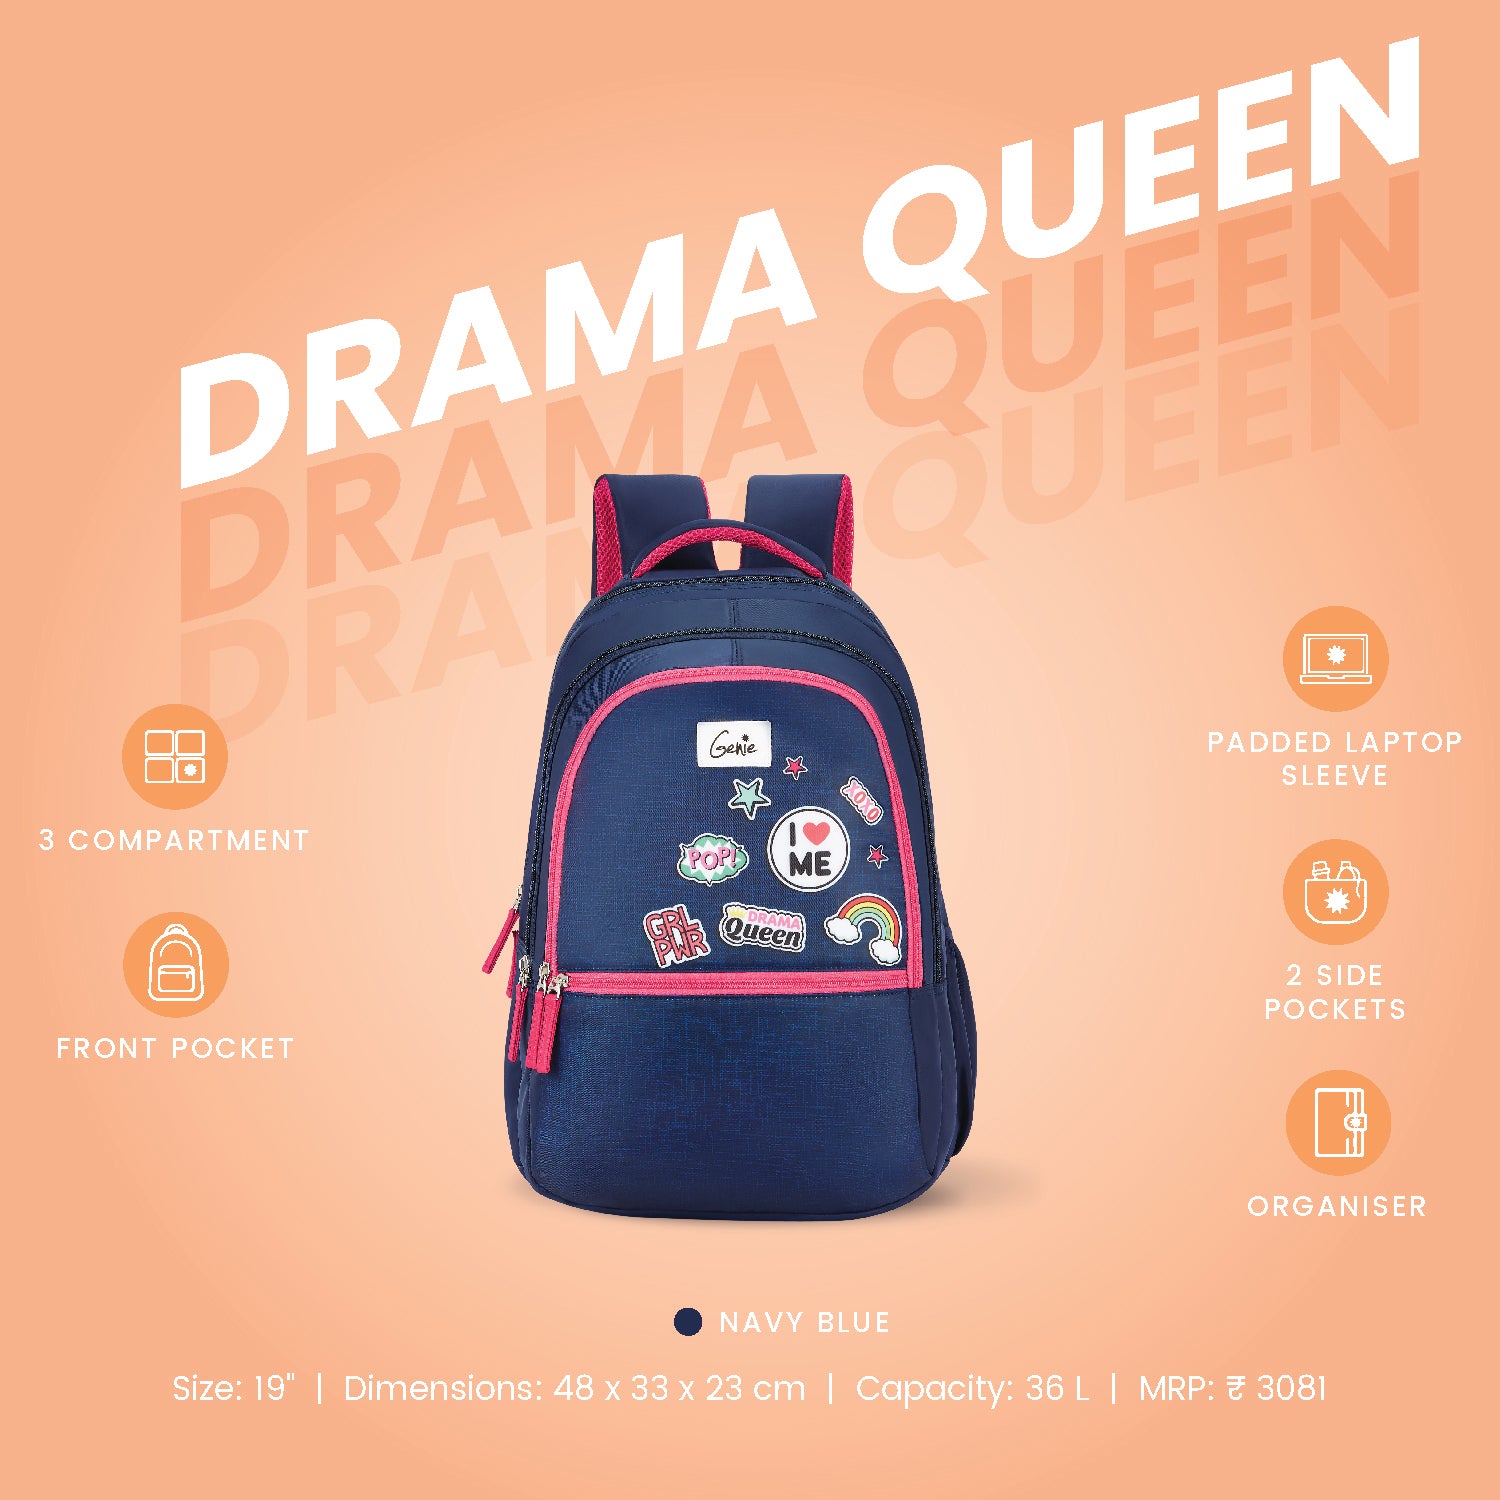 Drama Queen Laptop Backpack - Blue